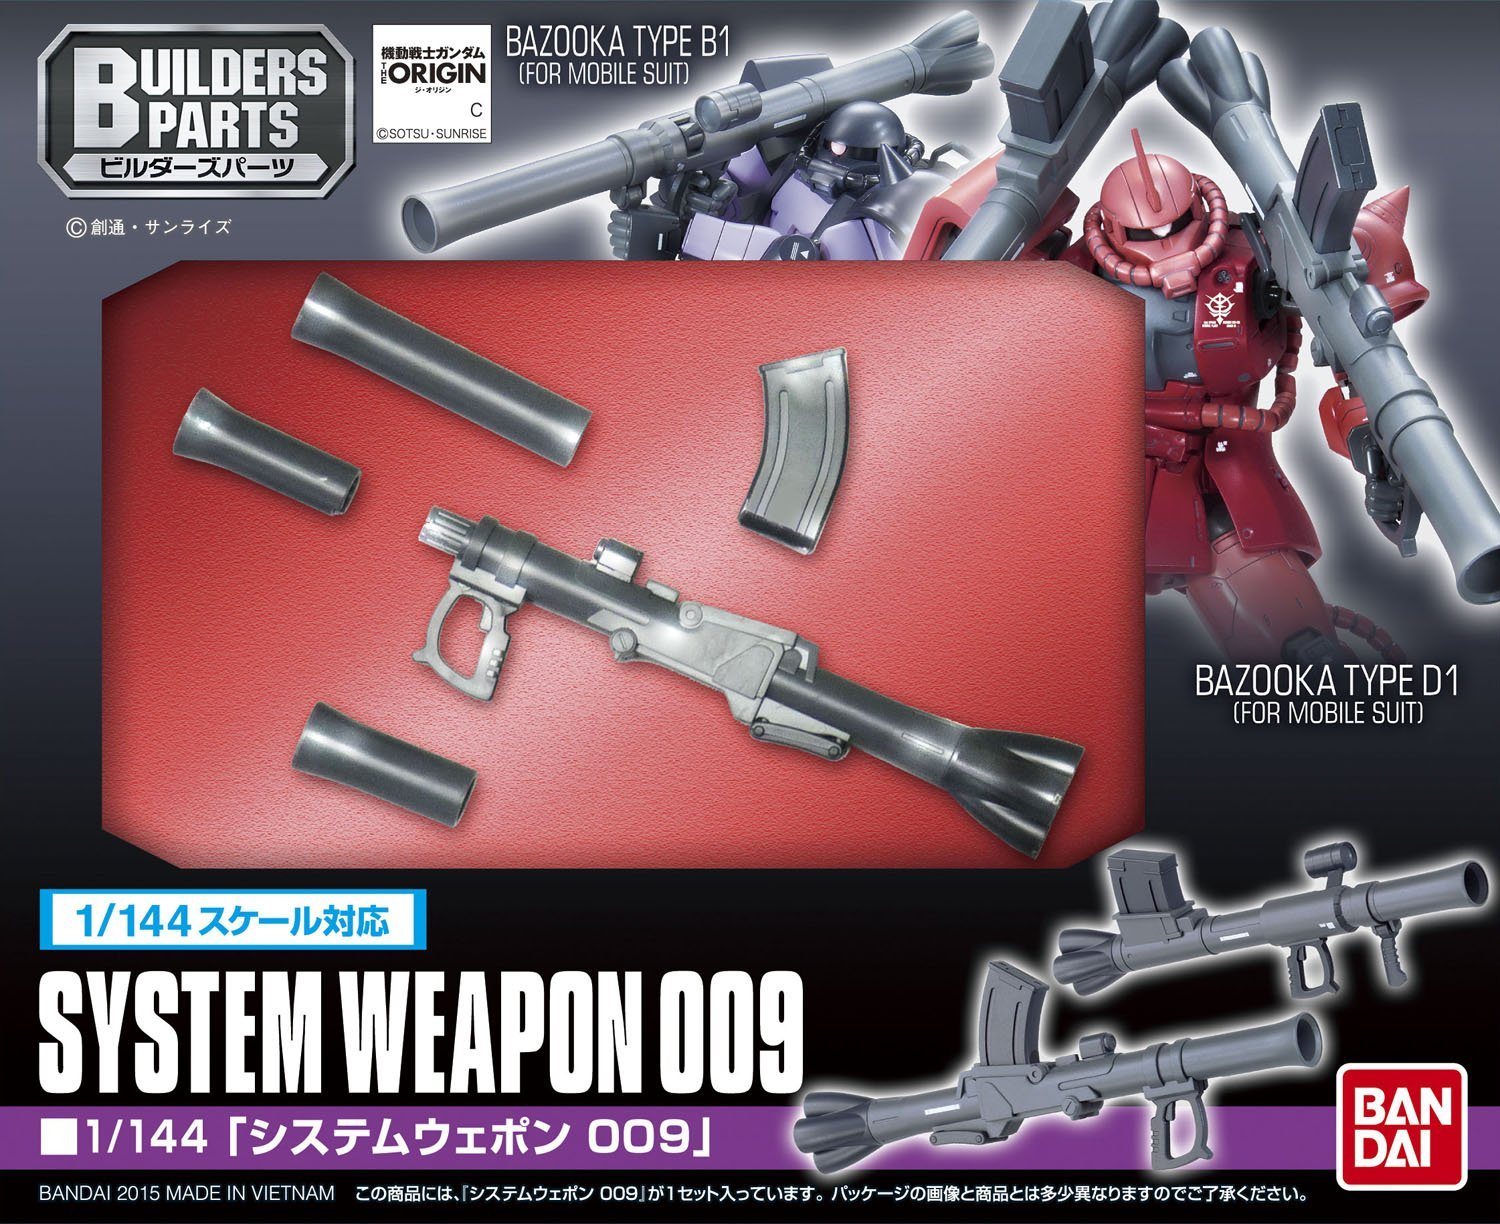 Builders Parts 1/144 System Weapon 009